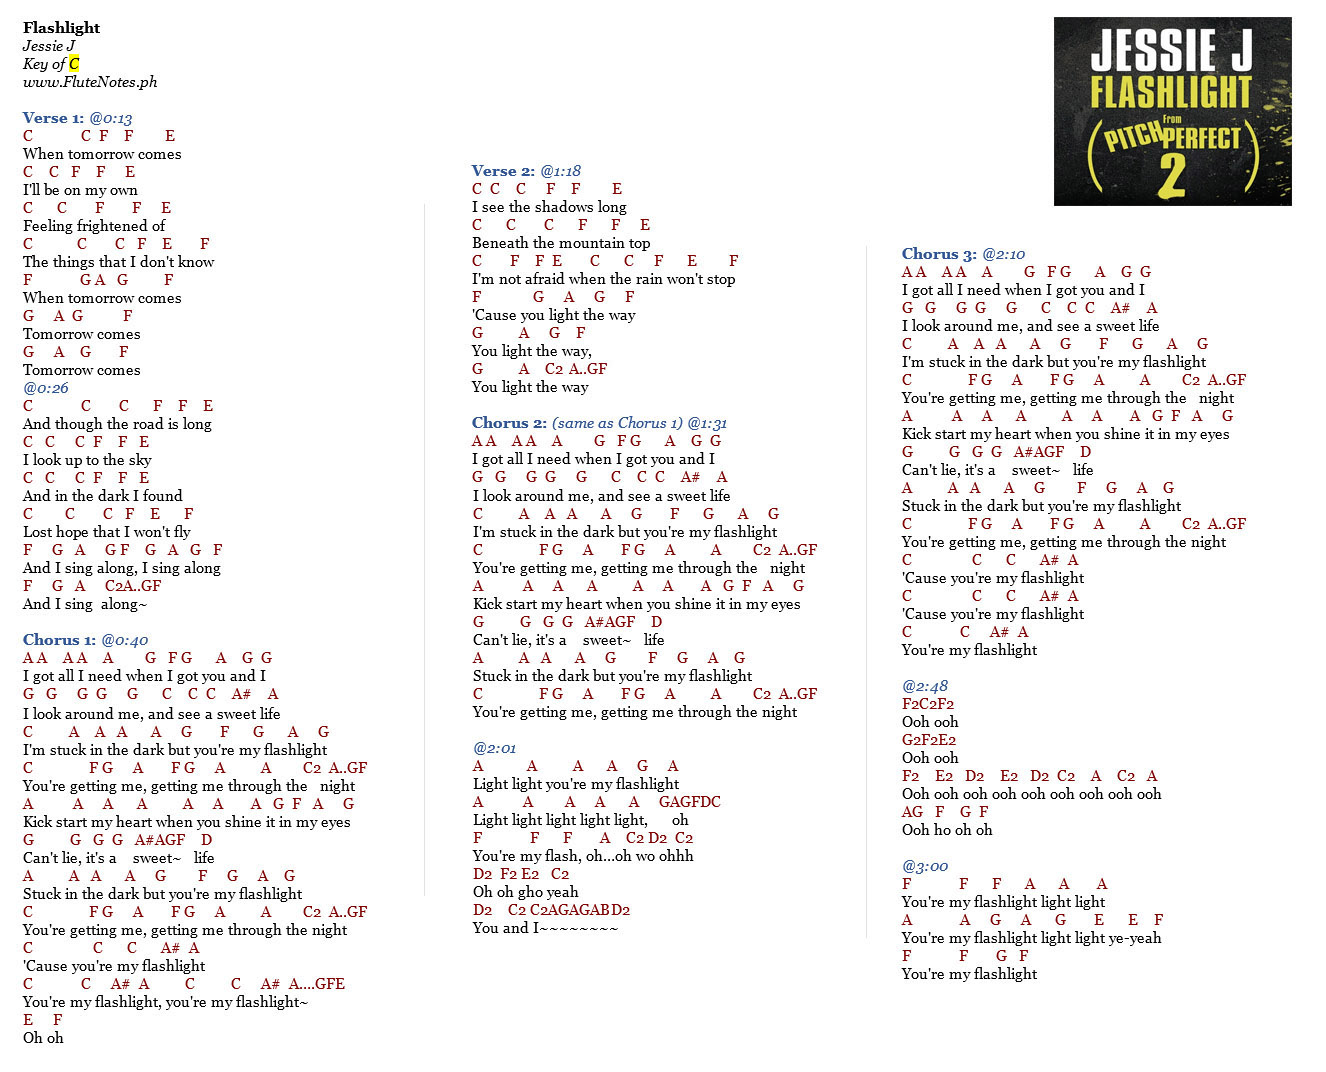 Flashlight sheet music by Jessie J (Piano, Vocal & Guitar (Right-Hand ...